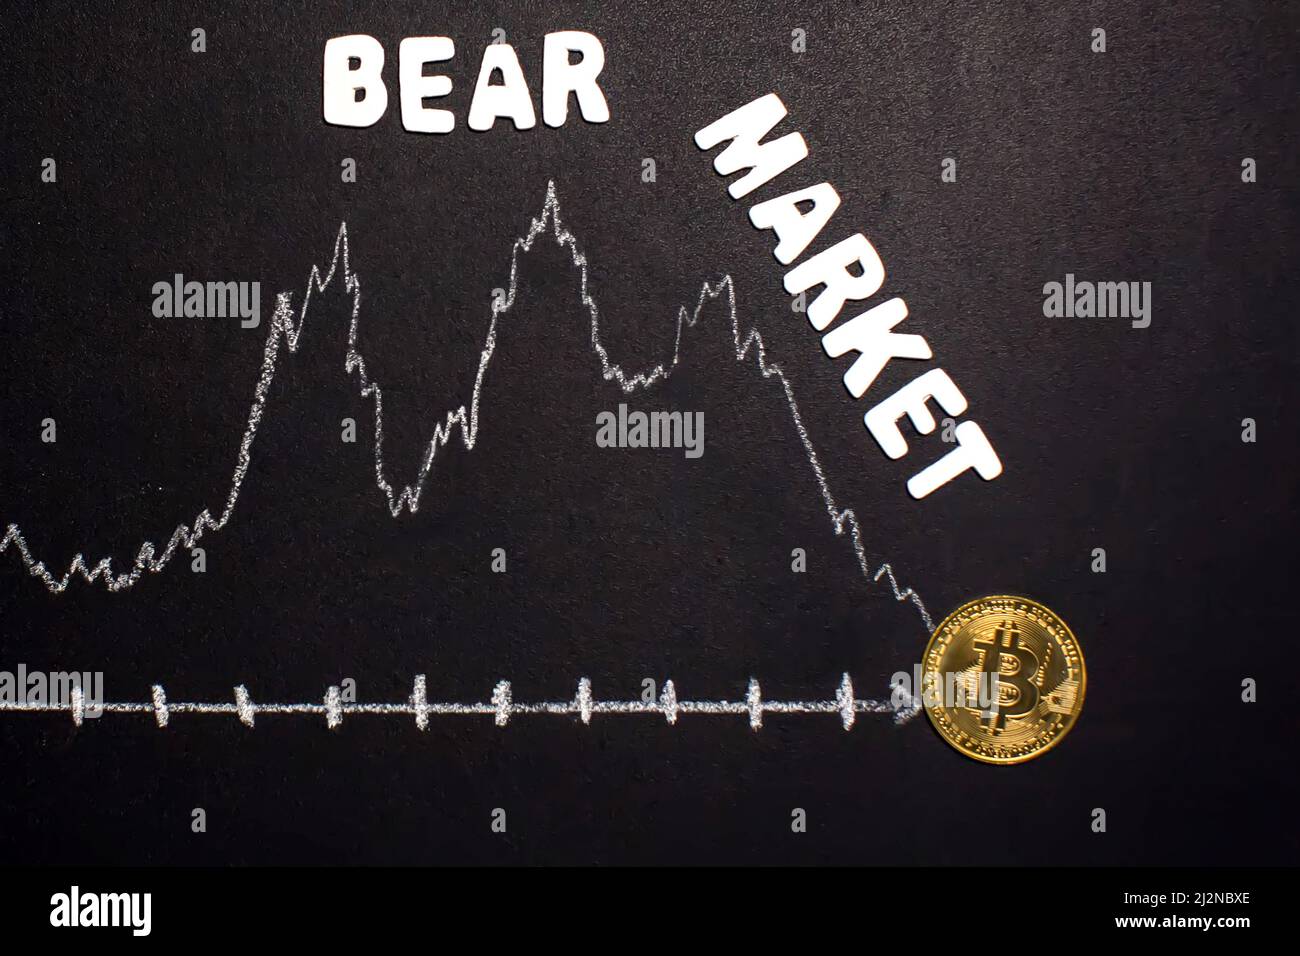 Financial bear market falling concept on blackboard background. Cryptocurrency collapse Stock Photo